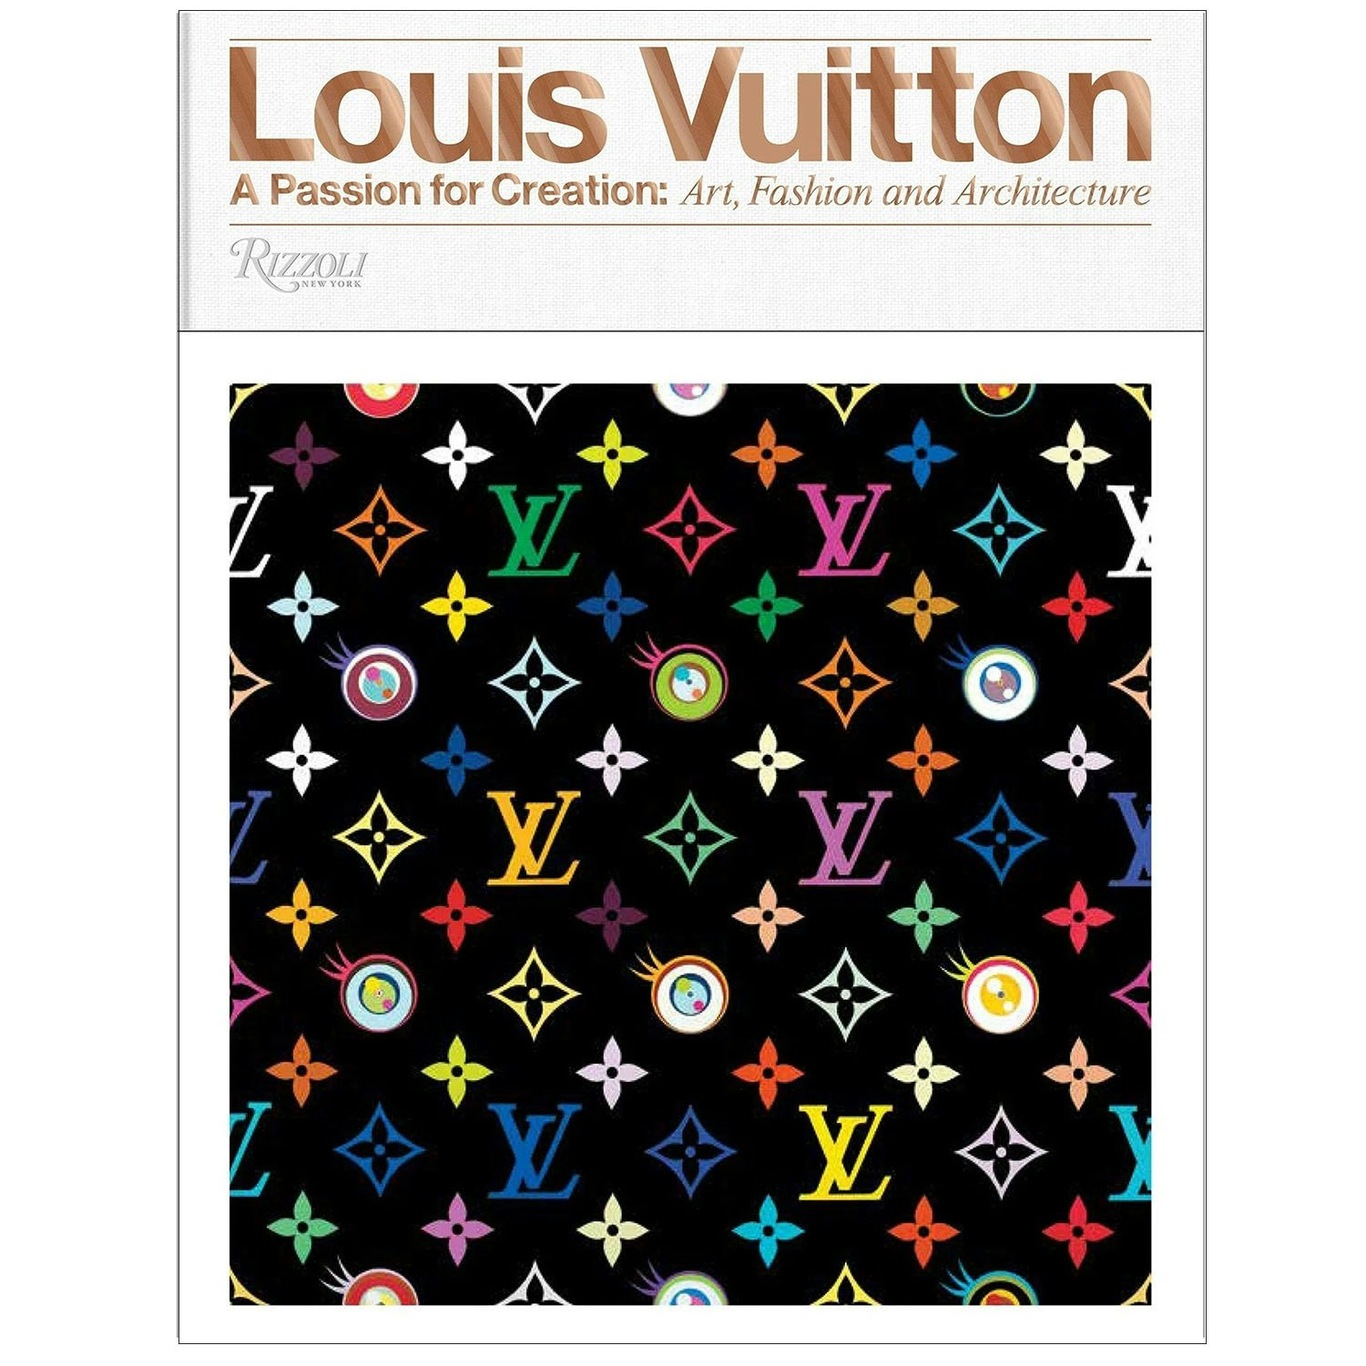 Louis Vuitton – A Passion for Creation Buch